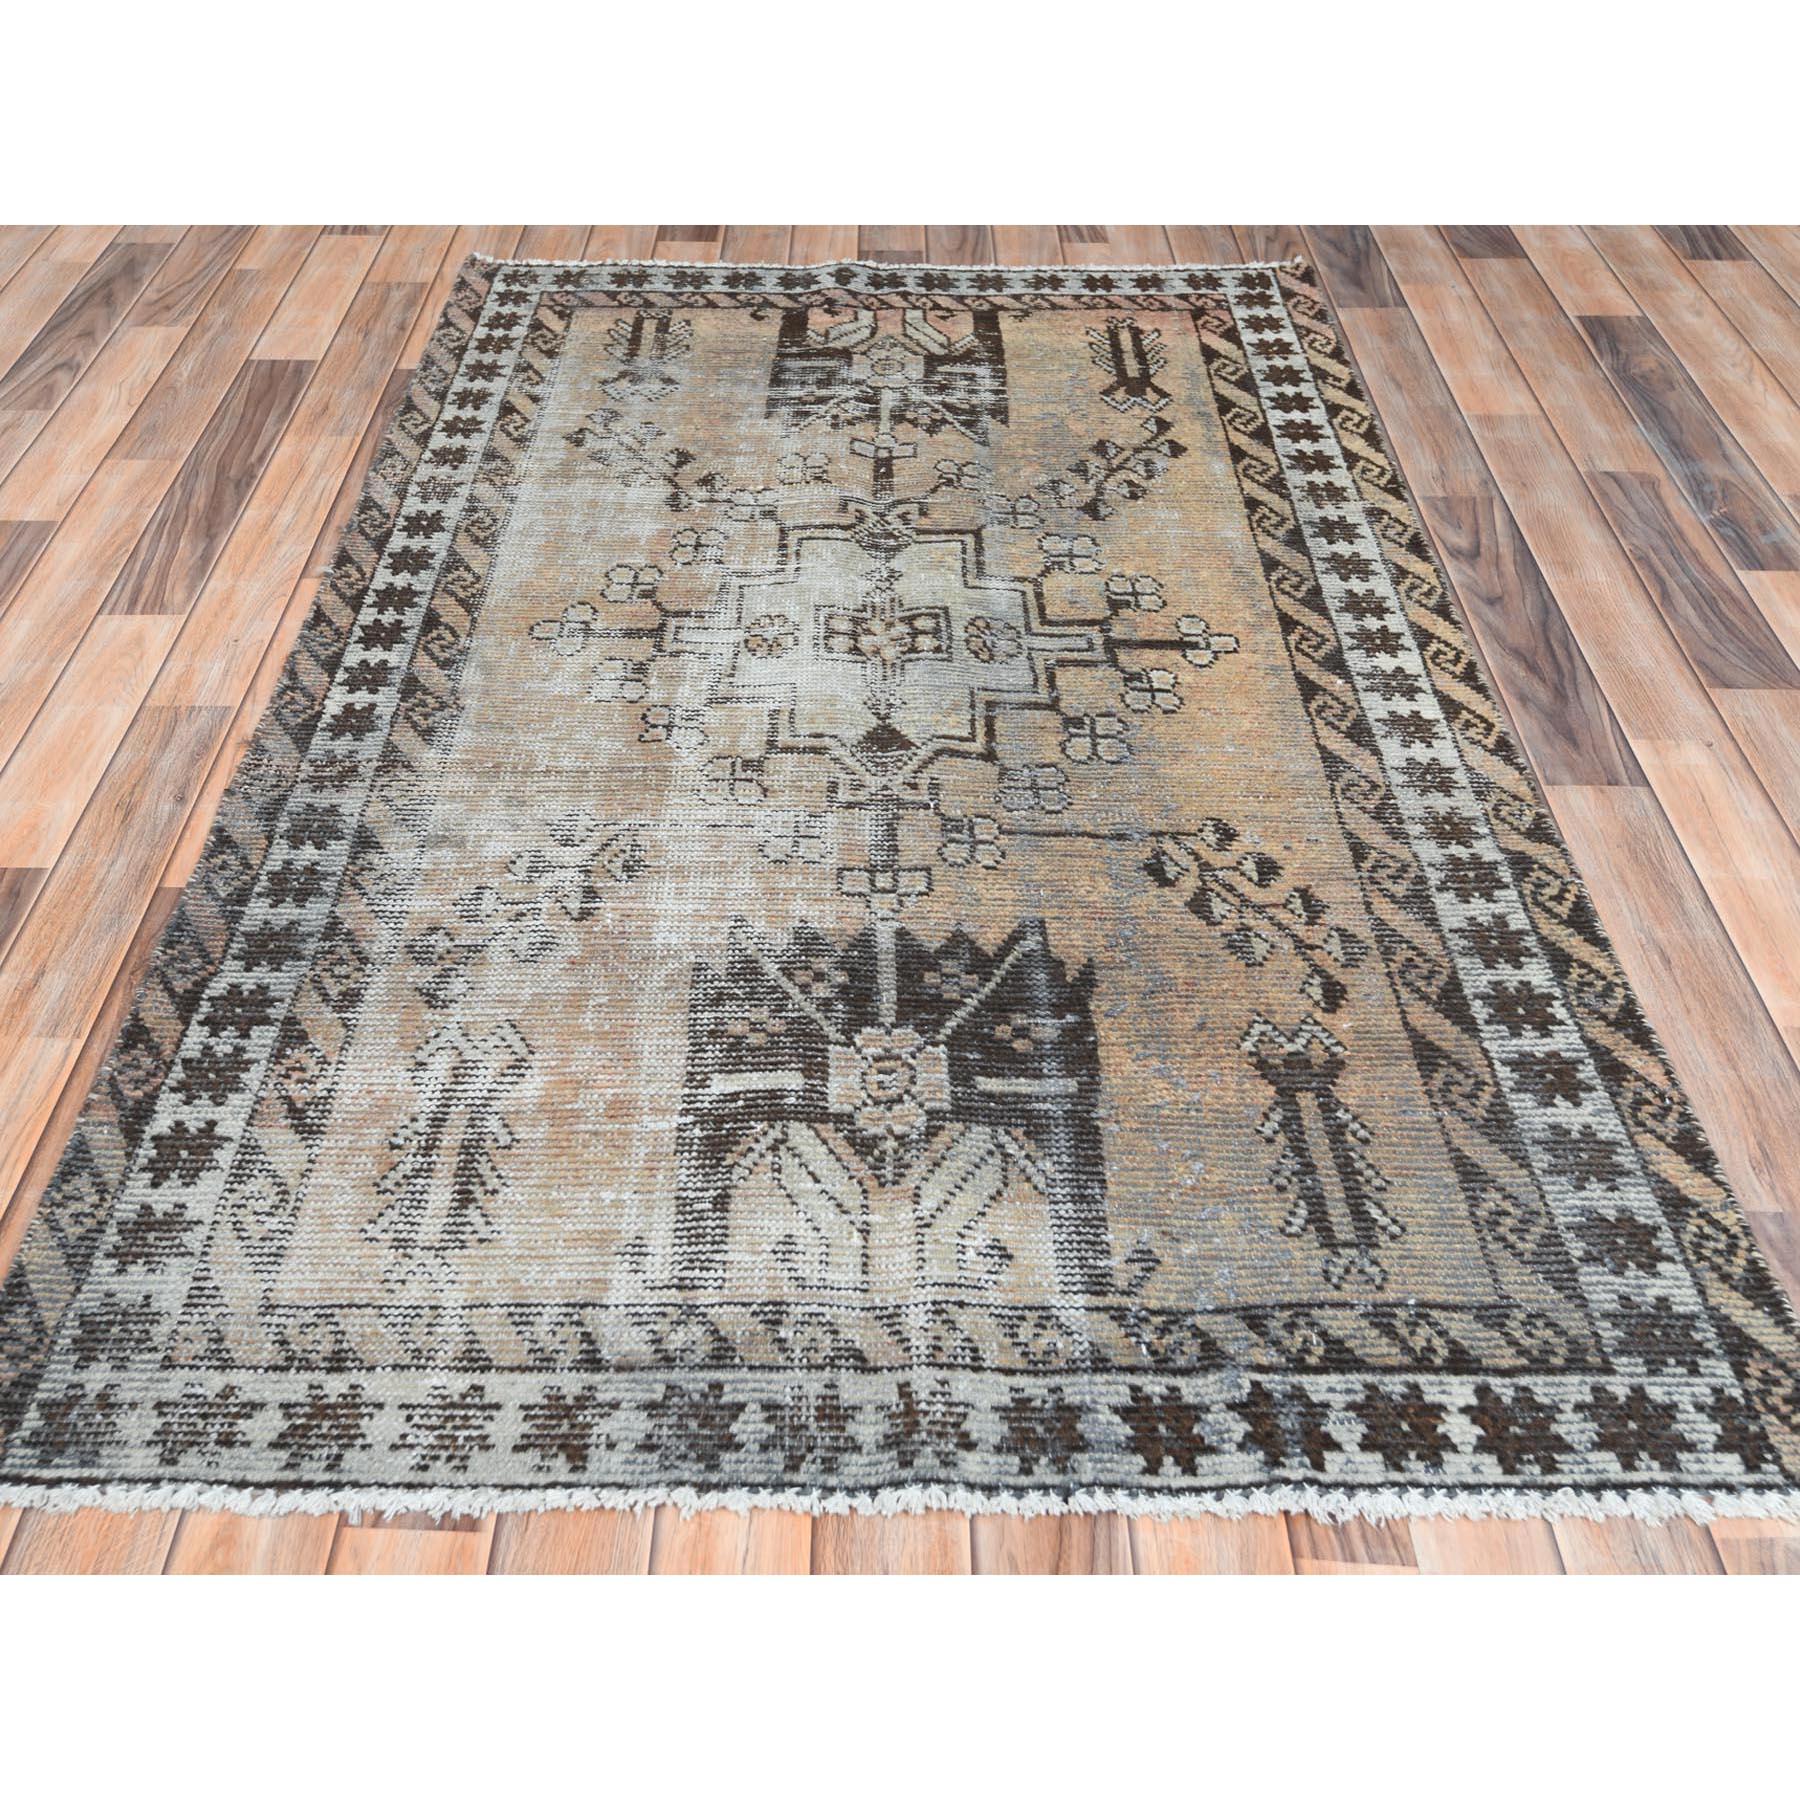 This fabulous Hand-Knotted carpet has been created and designed for extra strength and durability. This rug has been handcrafted for weeks in the traditional method that is used to make
Exact Rug Size in Feet and Inches : 3'10